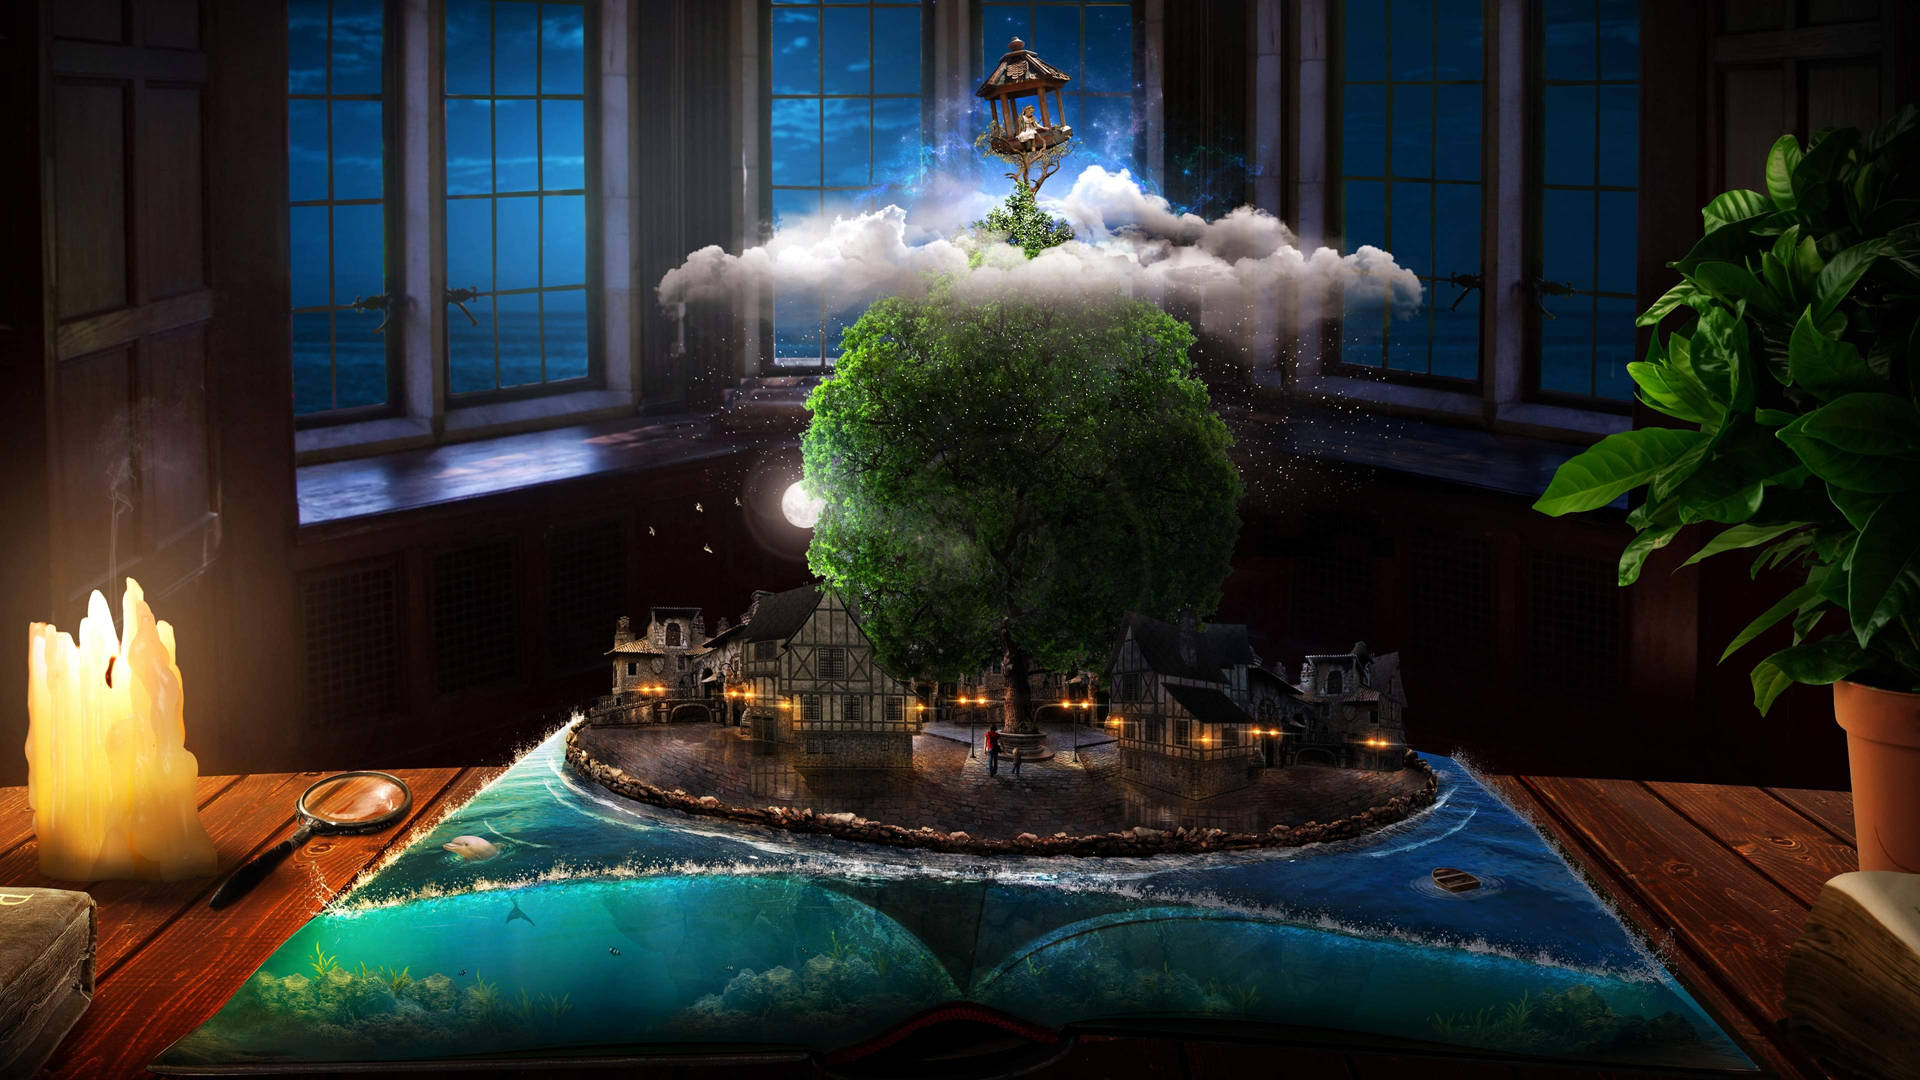 Let your imagination run wild as you explore the adventure of this magical book. Wallpaper